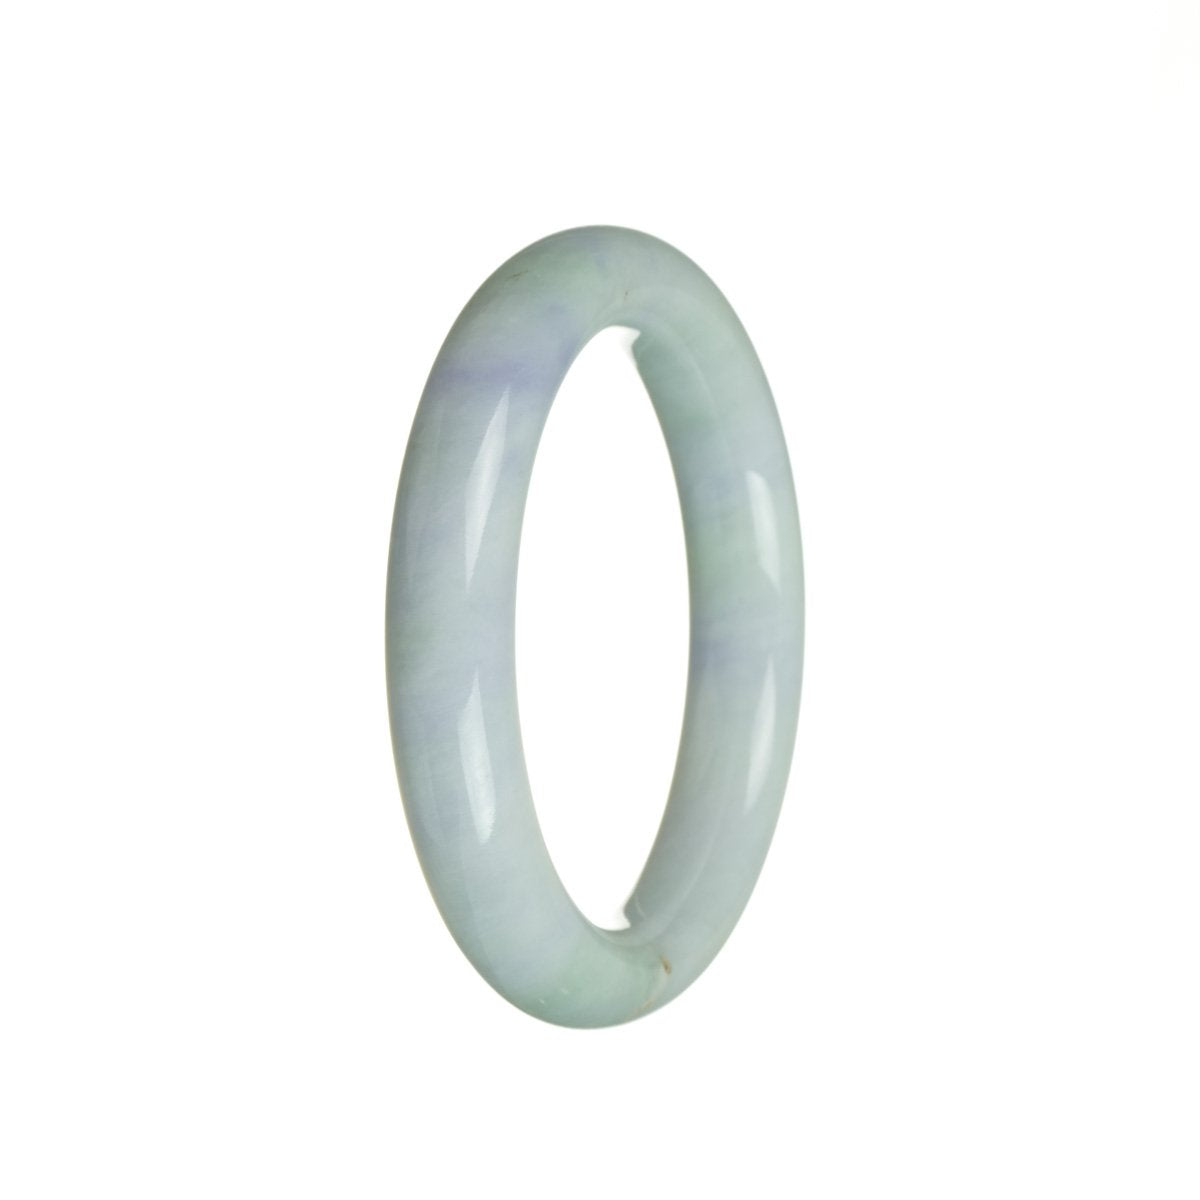 A beautiful lavender and green jade bangle bracelet, made with genuine Grade A jadeite. The bracelet is round and measures 56mm in diameter. Perfect for adding a touch of elegance to any outfit.